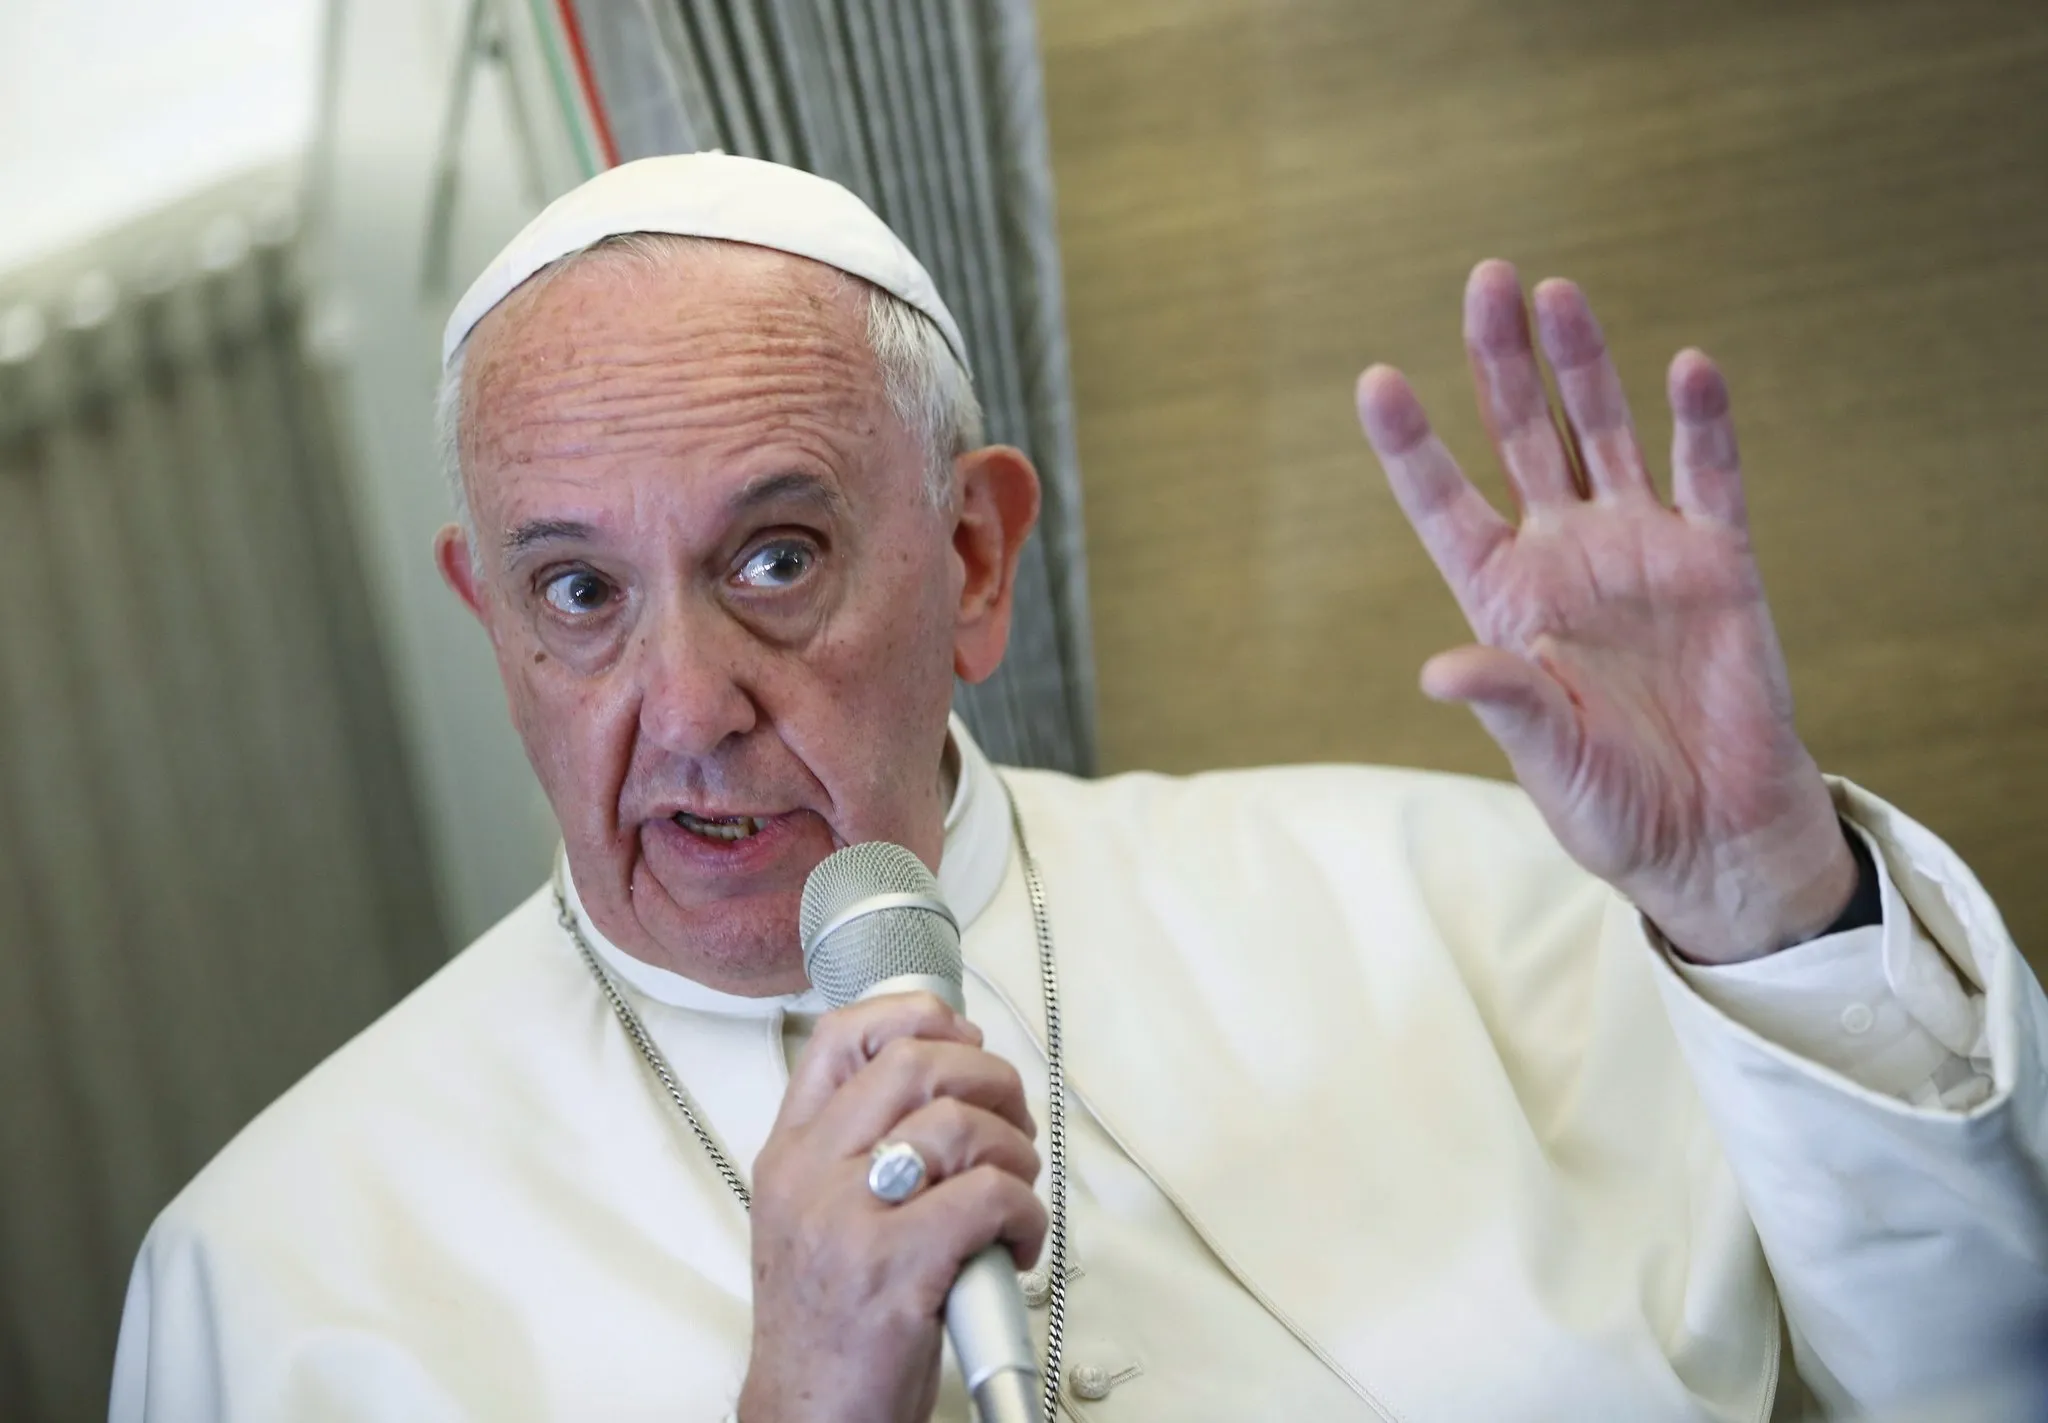 Pope Says US Border Must Be Open “The Migrant Has To Be Received”